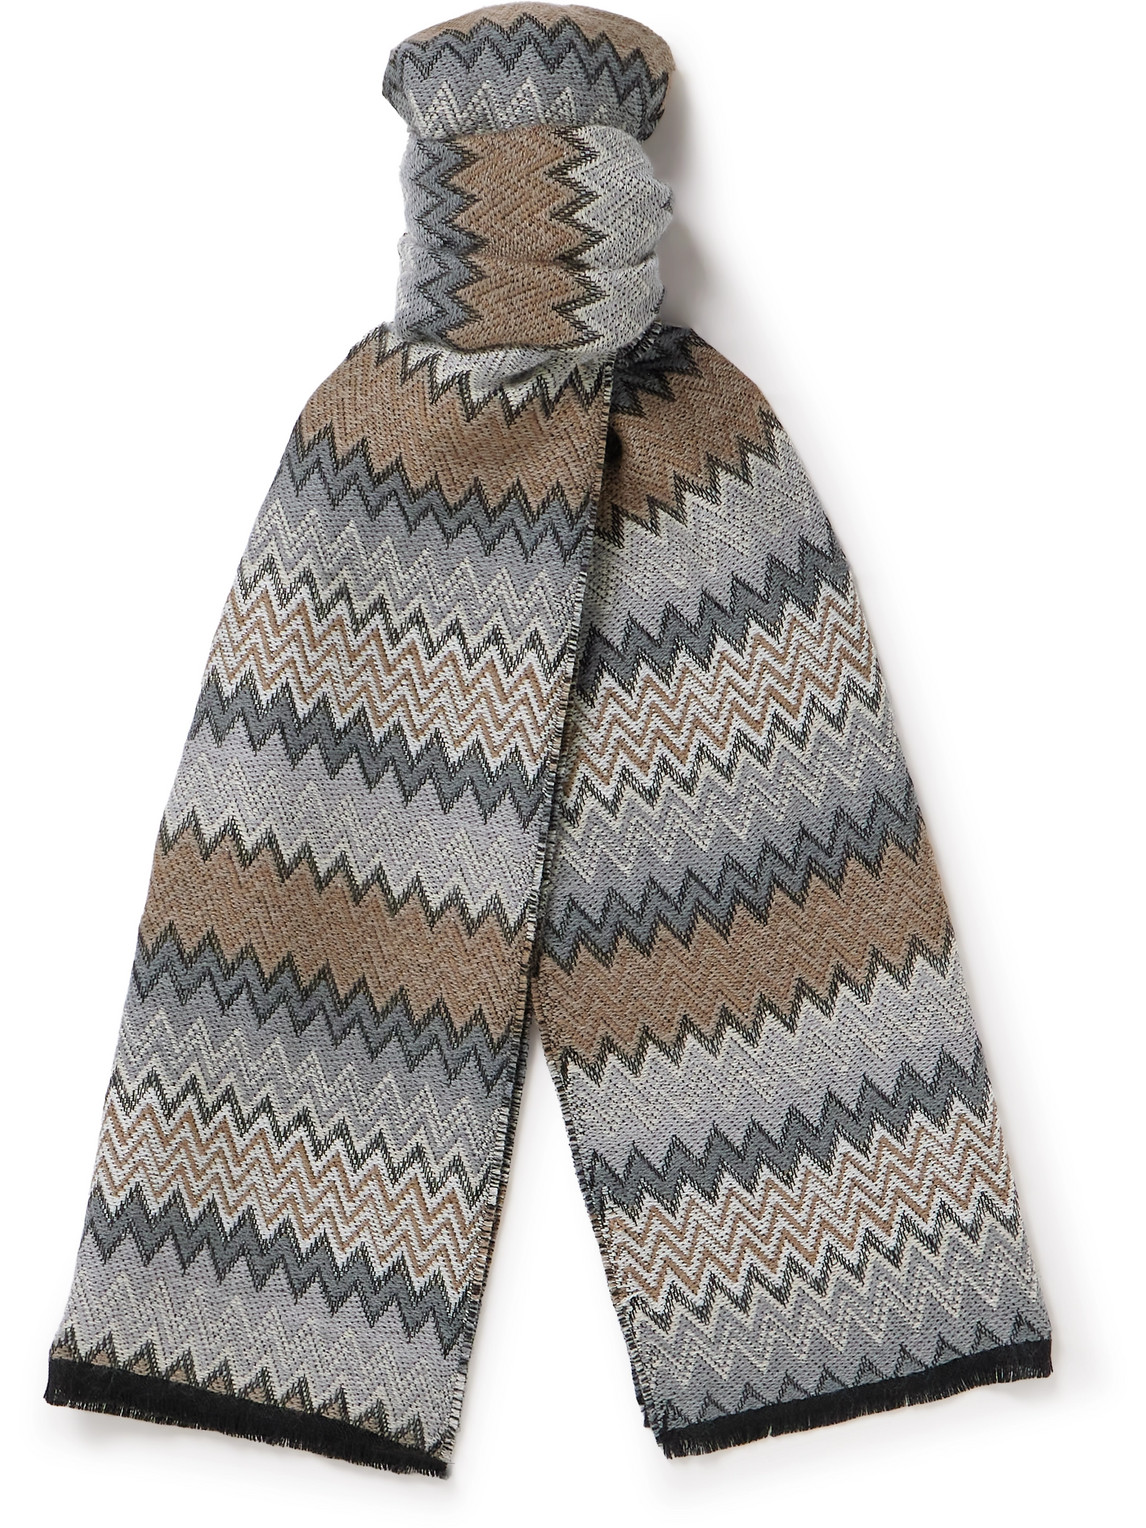 Missoni Fringed Striped Crocheted Cotton Scarf In Gray